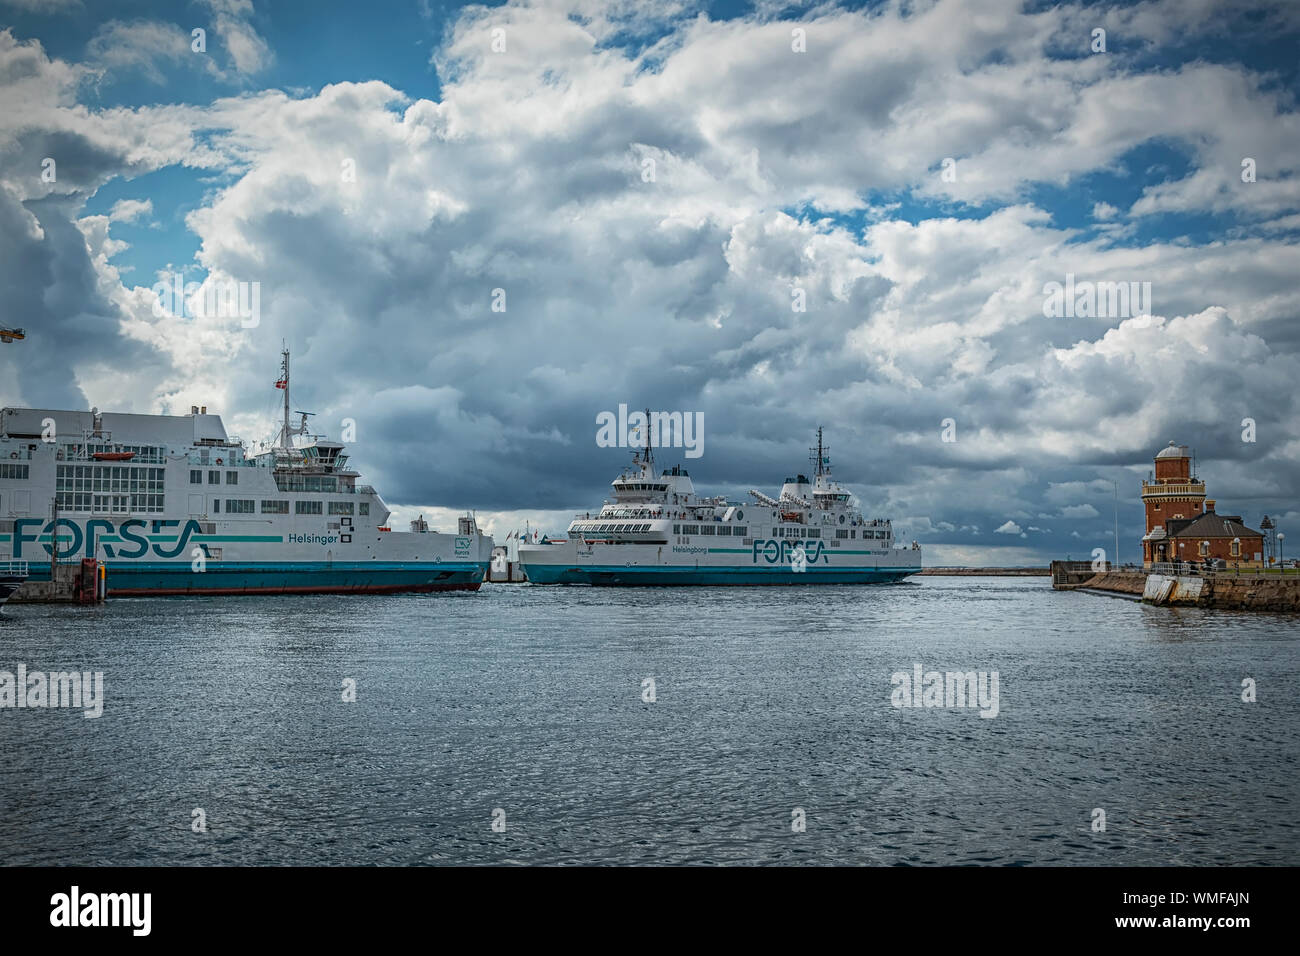 HELSINGBORG, SWEDEN - AUGUST 16, 2019: Aurora the battery powered passanger and freight ferry sails into Helsingborg harbour in Sweden. Stock Photo